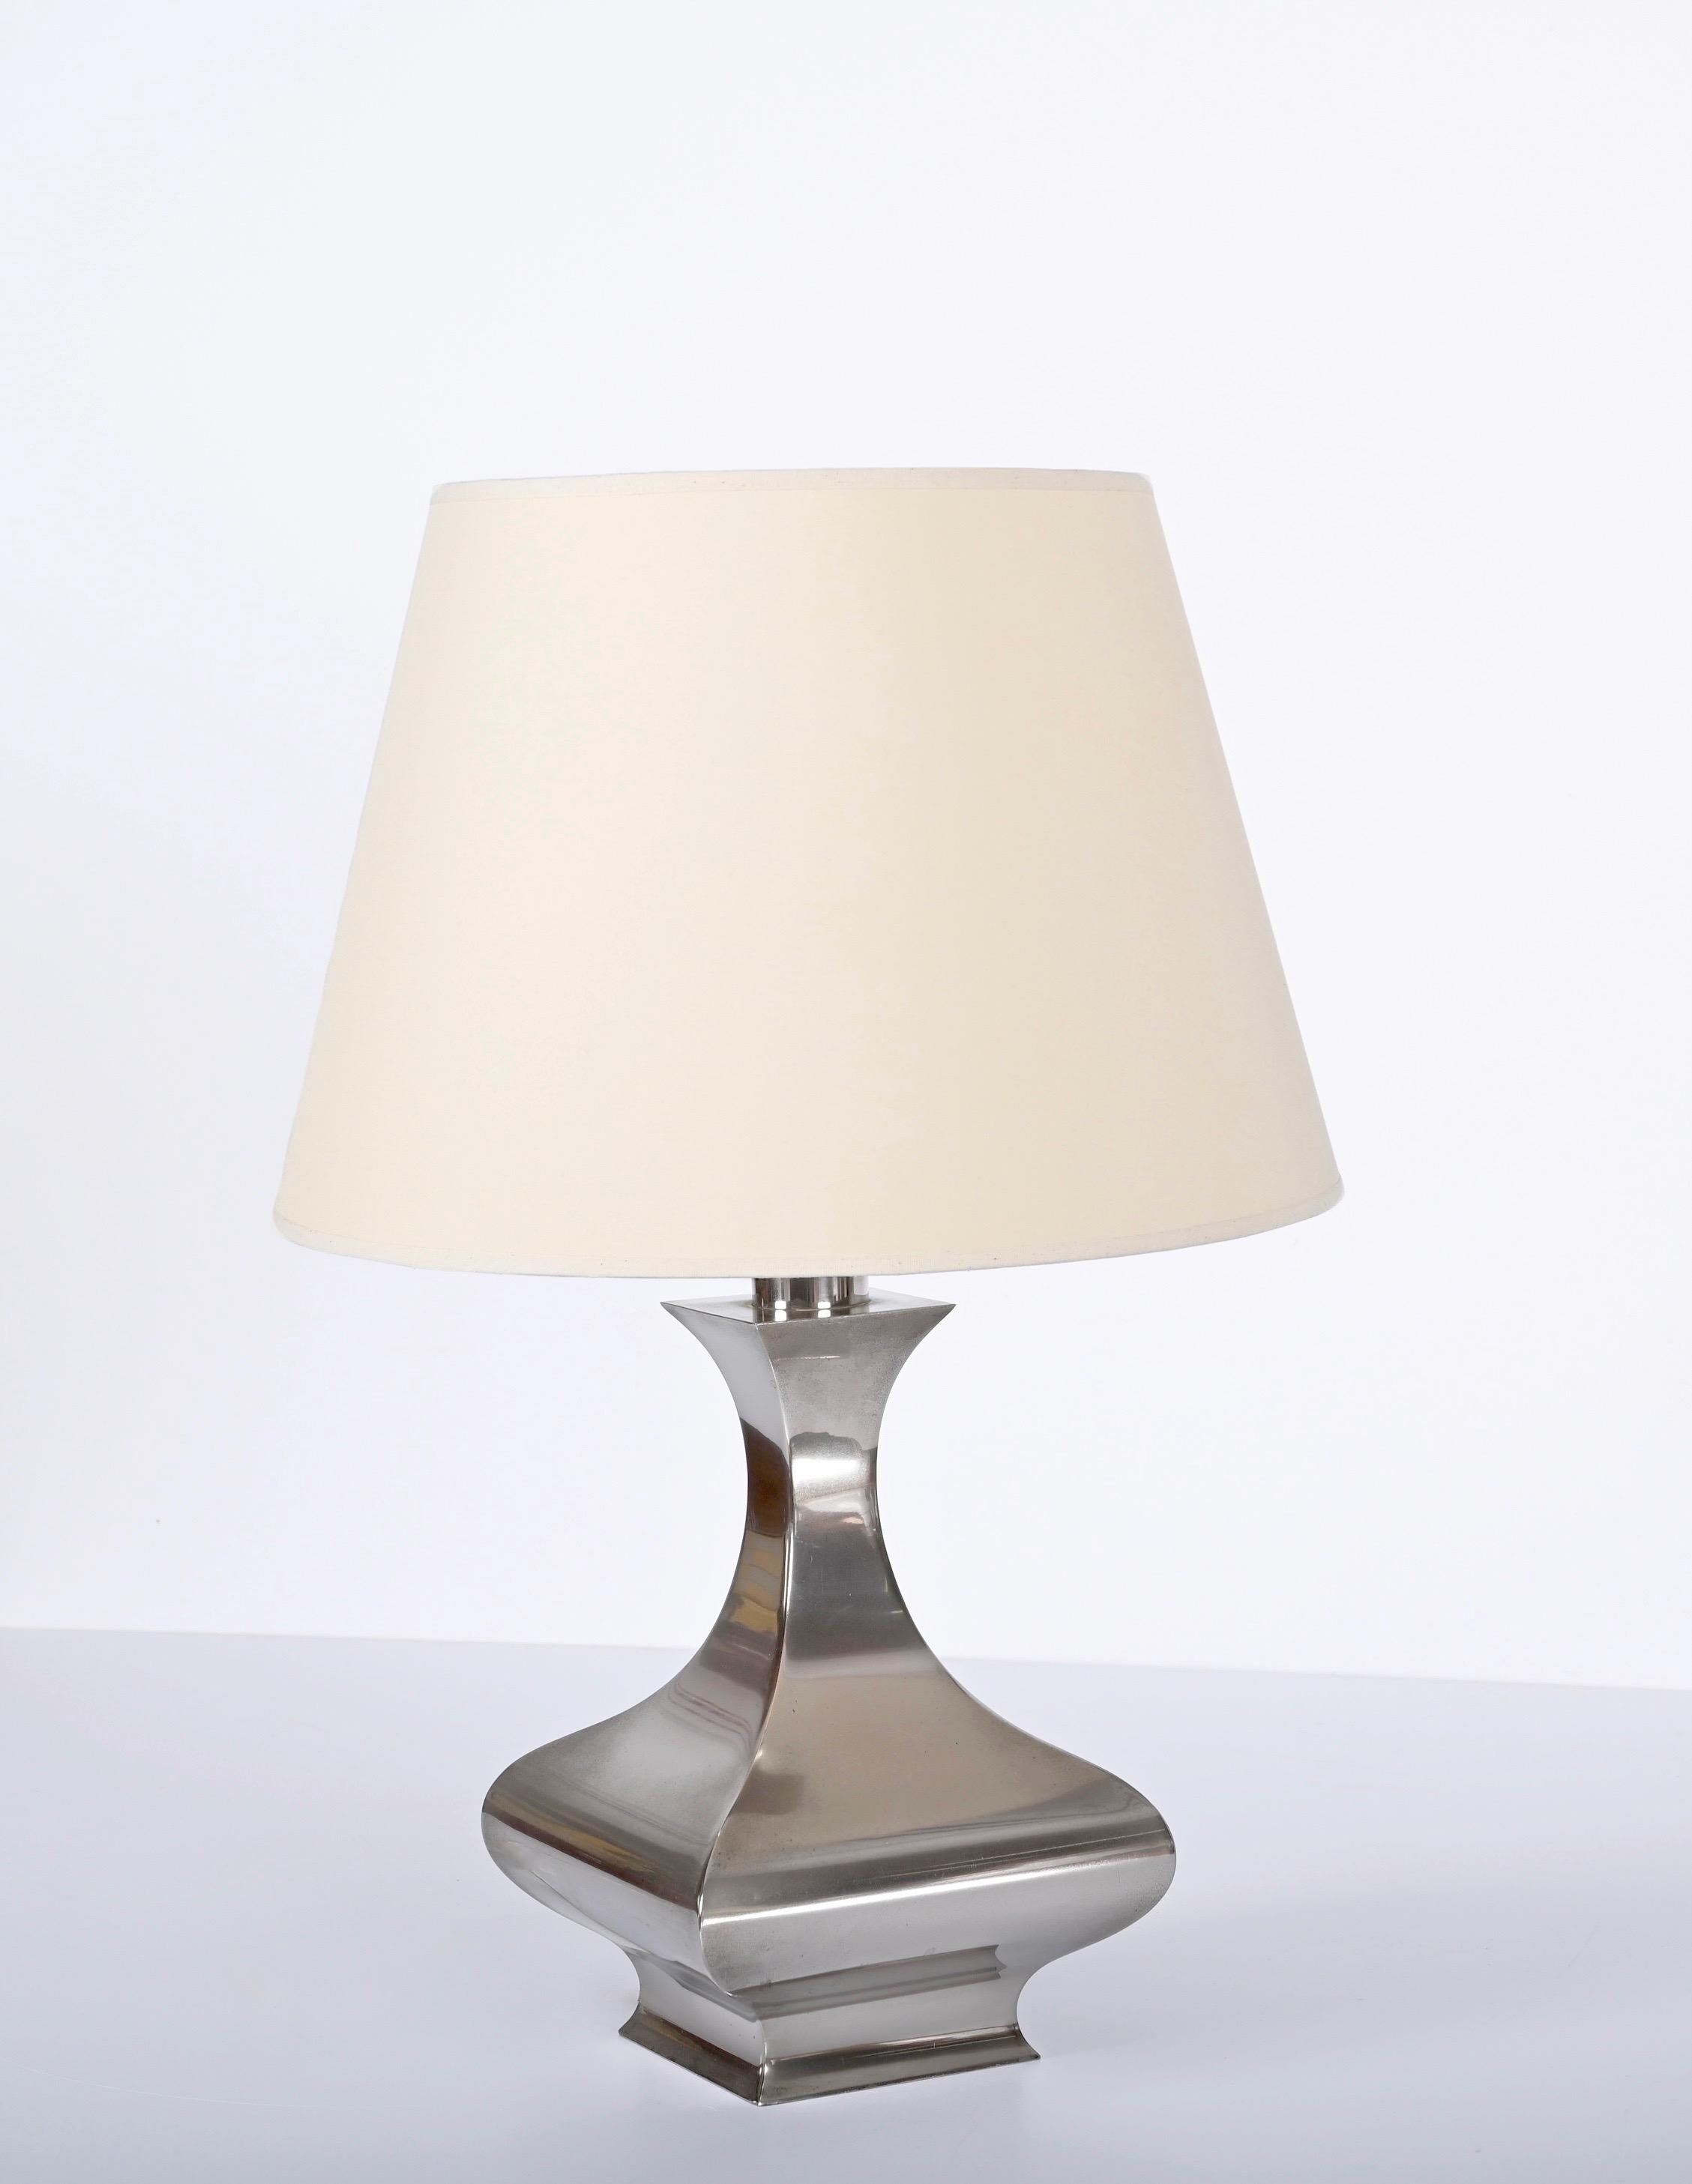 French Mid-Century Polished Stainless Steel Table Lamp by Maria Pergay, France 1970s